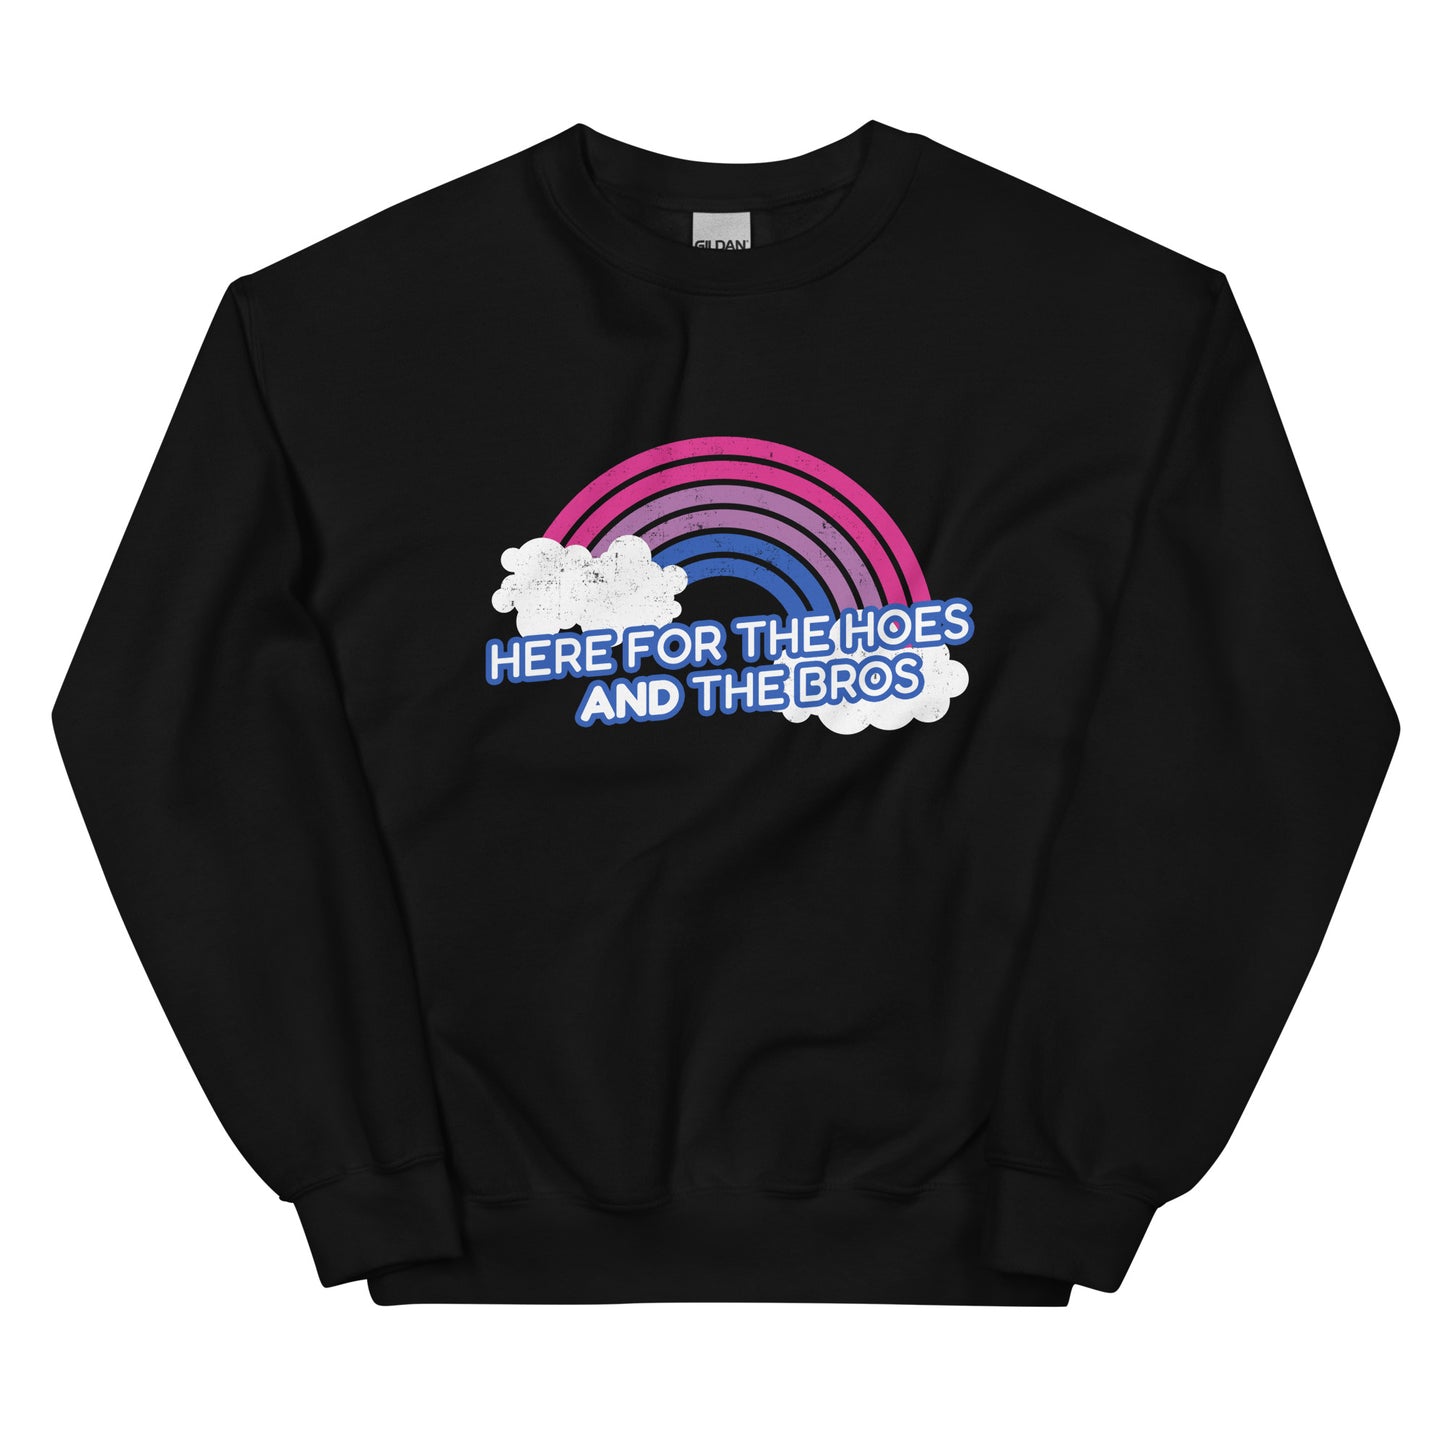 Here For the Bros And the Hoes Unisex Sweatshirt